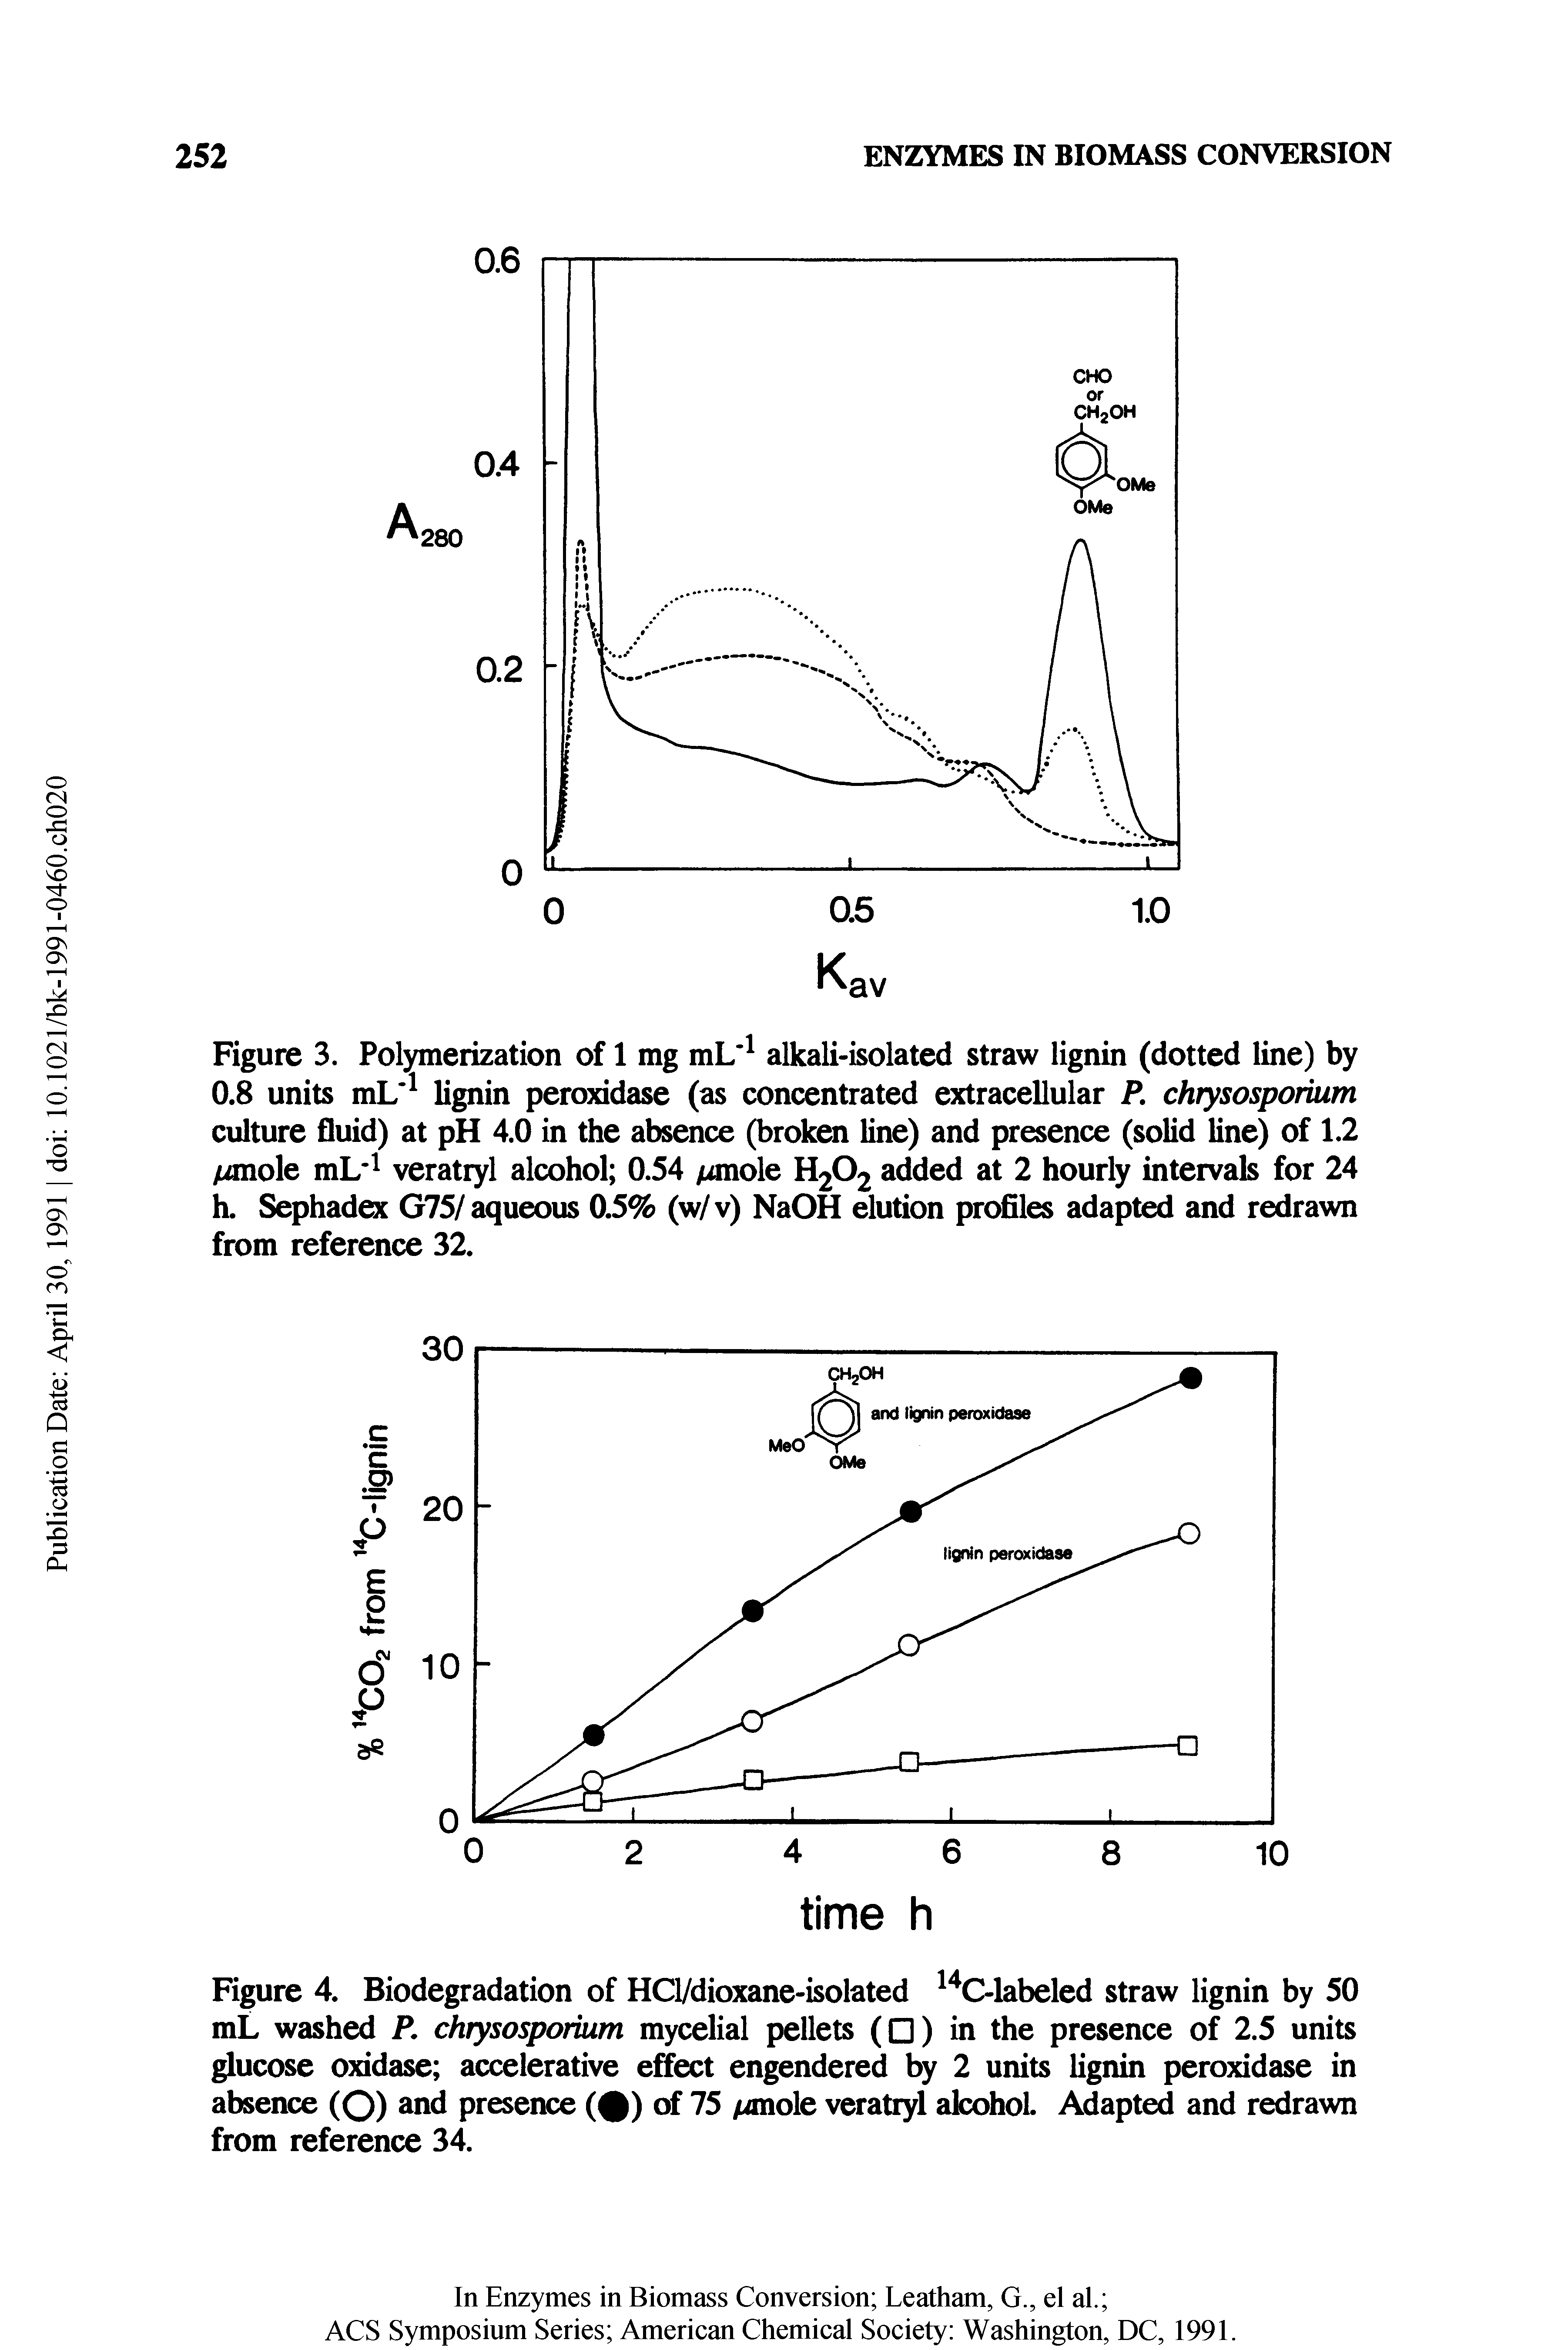 Figure 3. Polymerization of 1 mg mL alkali-isolated straw lignin (dotted line) by 0.8 units mL lignin peroxidase (as concentrated extracellular P, chrysosporium culture fluid) at pH 4.0 in the absence (broken line) and presence (solid line) of 1.2 /imole mL veratryl alcohol 0.54 /imole H2O2 added at 2 hourly intervals for 24 h. Sephadex G75/aqueous 0.5% (w/v) NaOH elution profiles adapted and redrawn from reference 32.